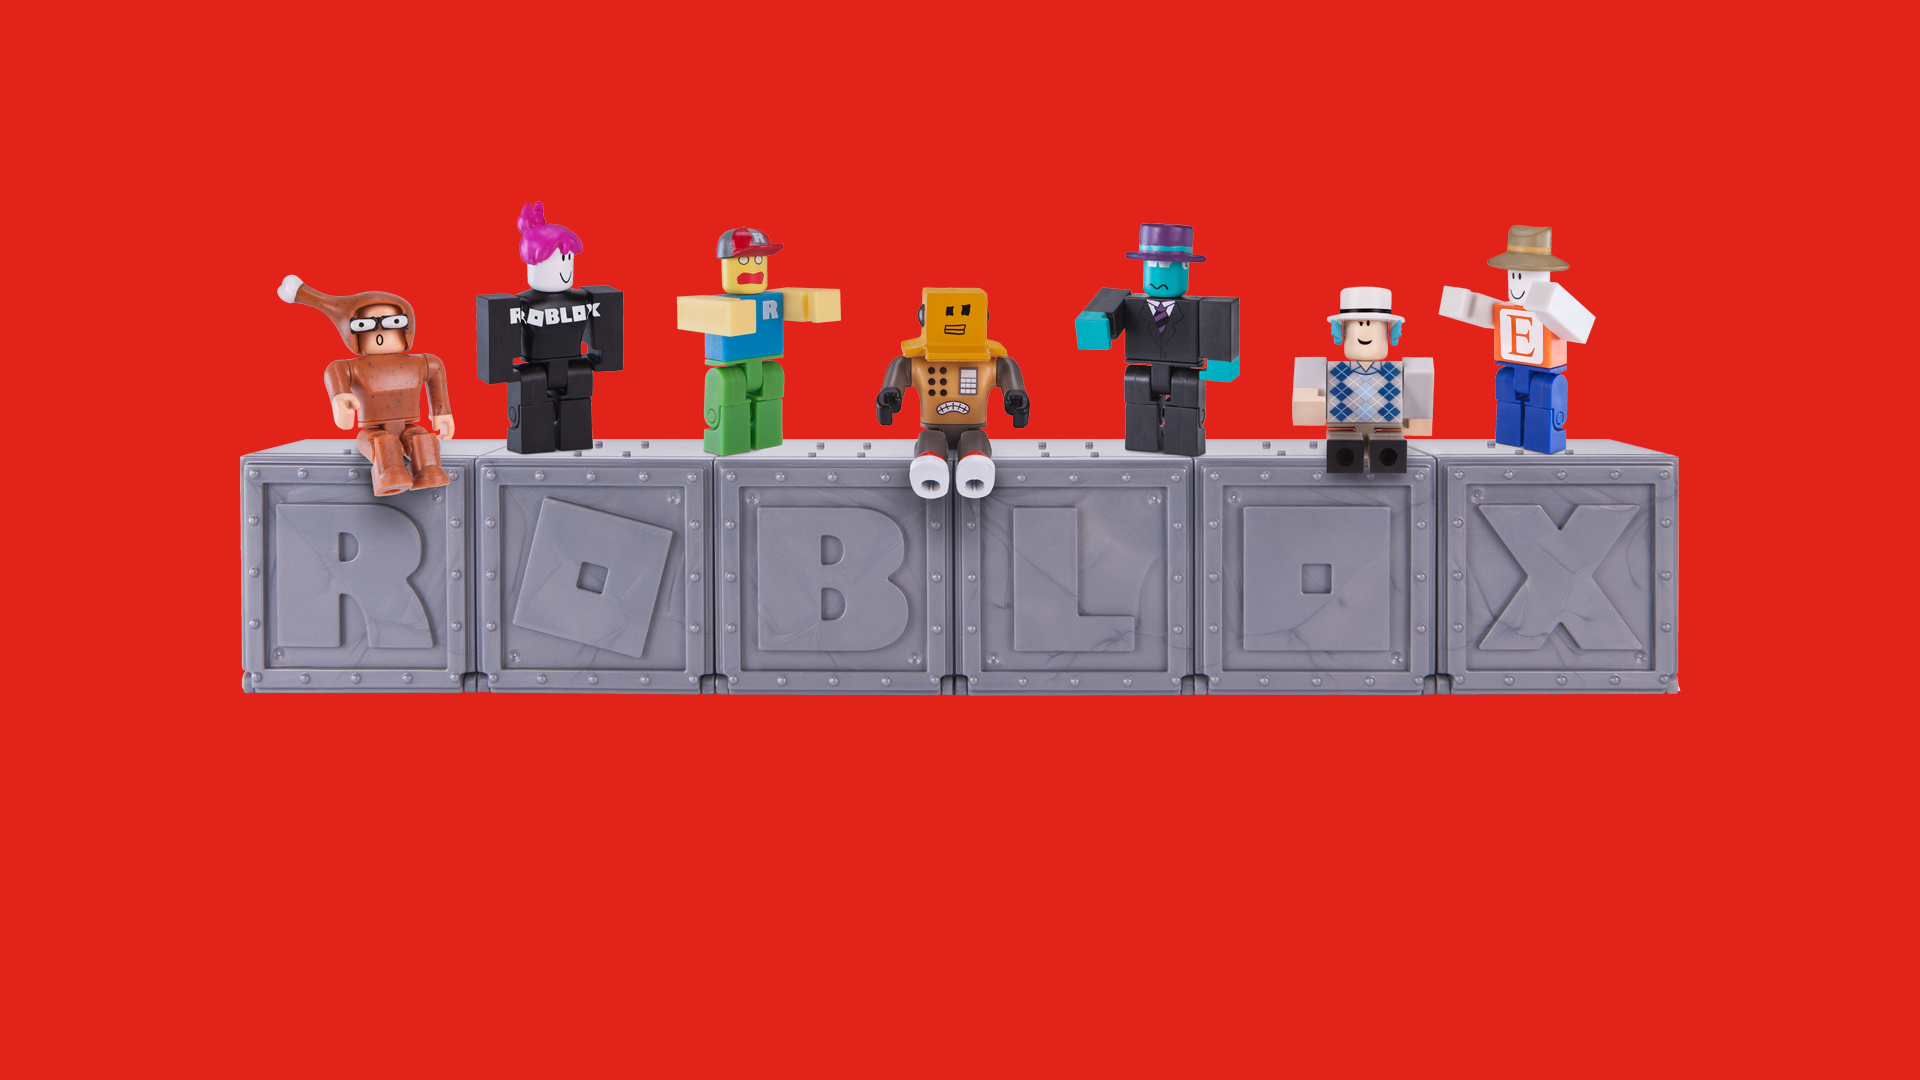 Do Roblox Toys Come With Roblox Online Items